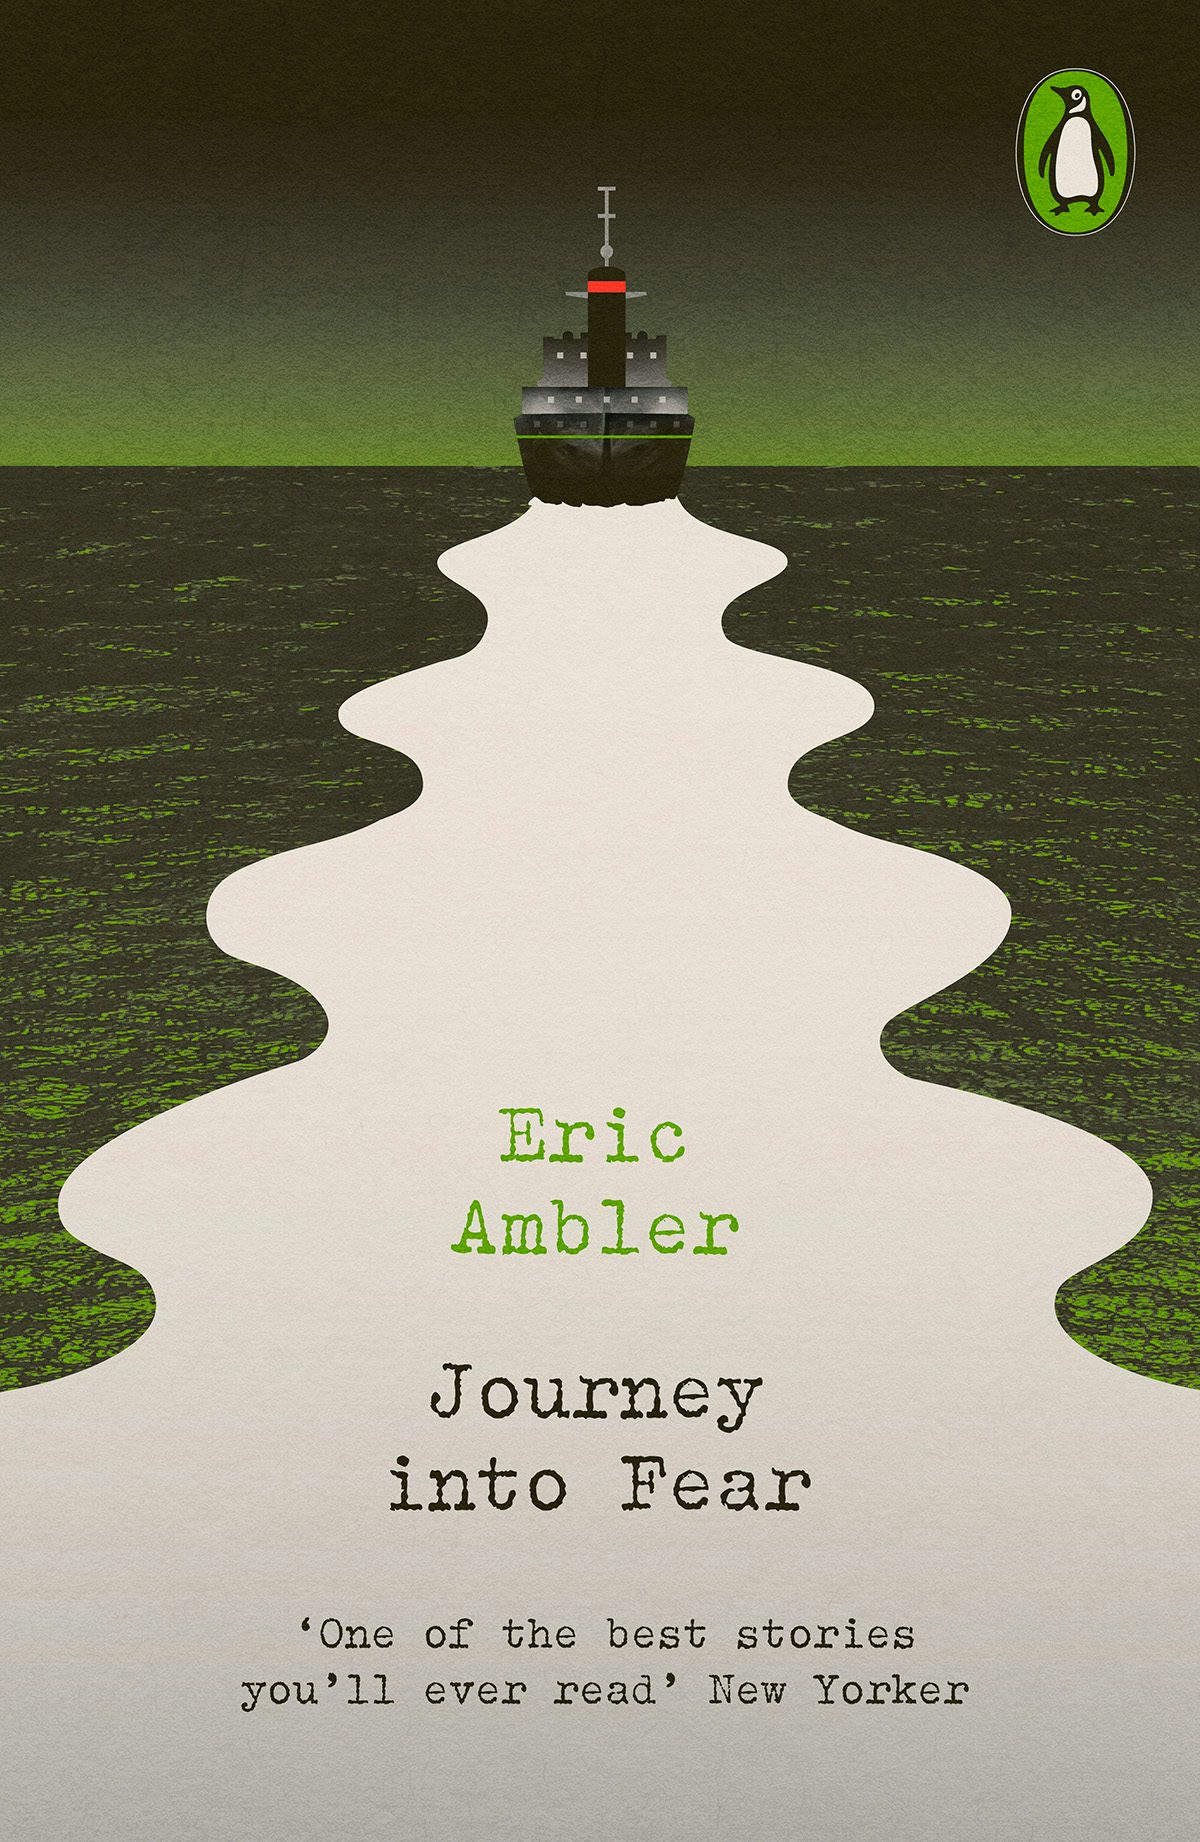 Image shows the cover of Journey into Fear from Penguin Modern Classics Crime and Espionage series, showing an illustration of a boat carving a white path in the water